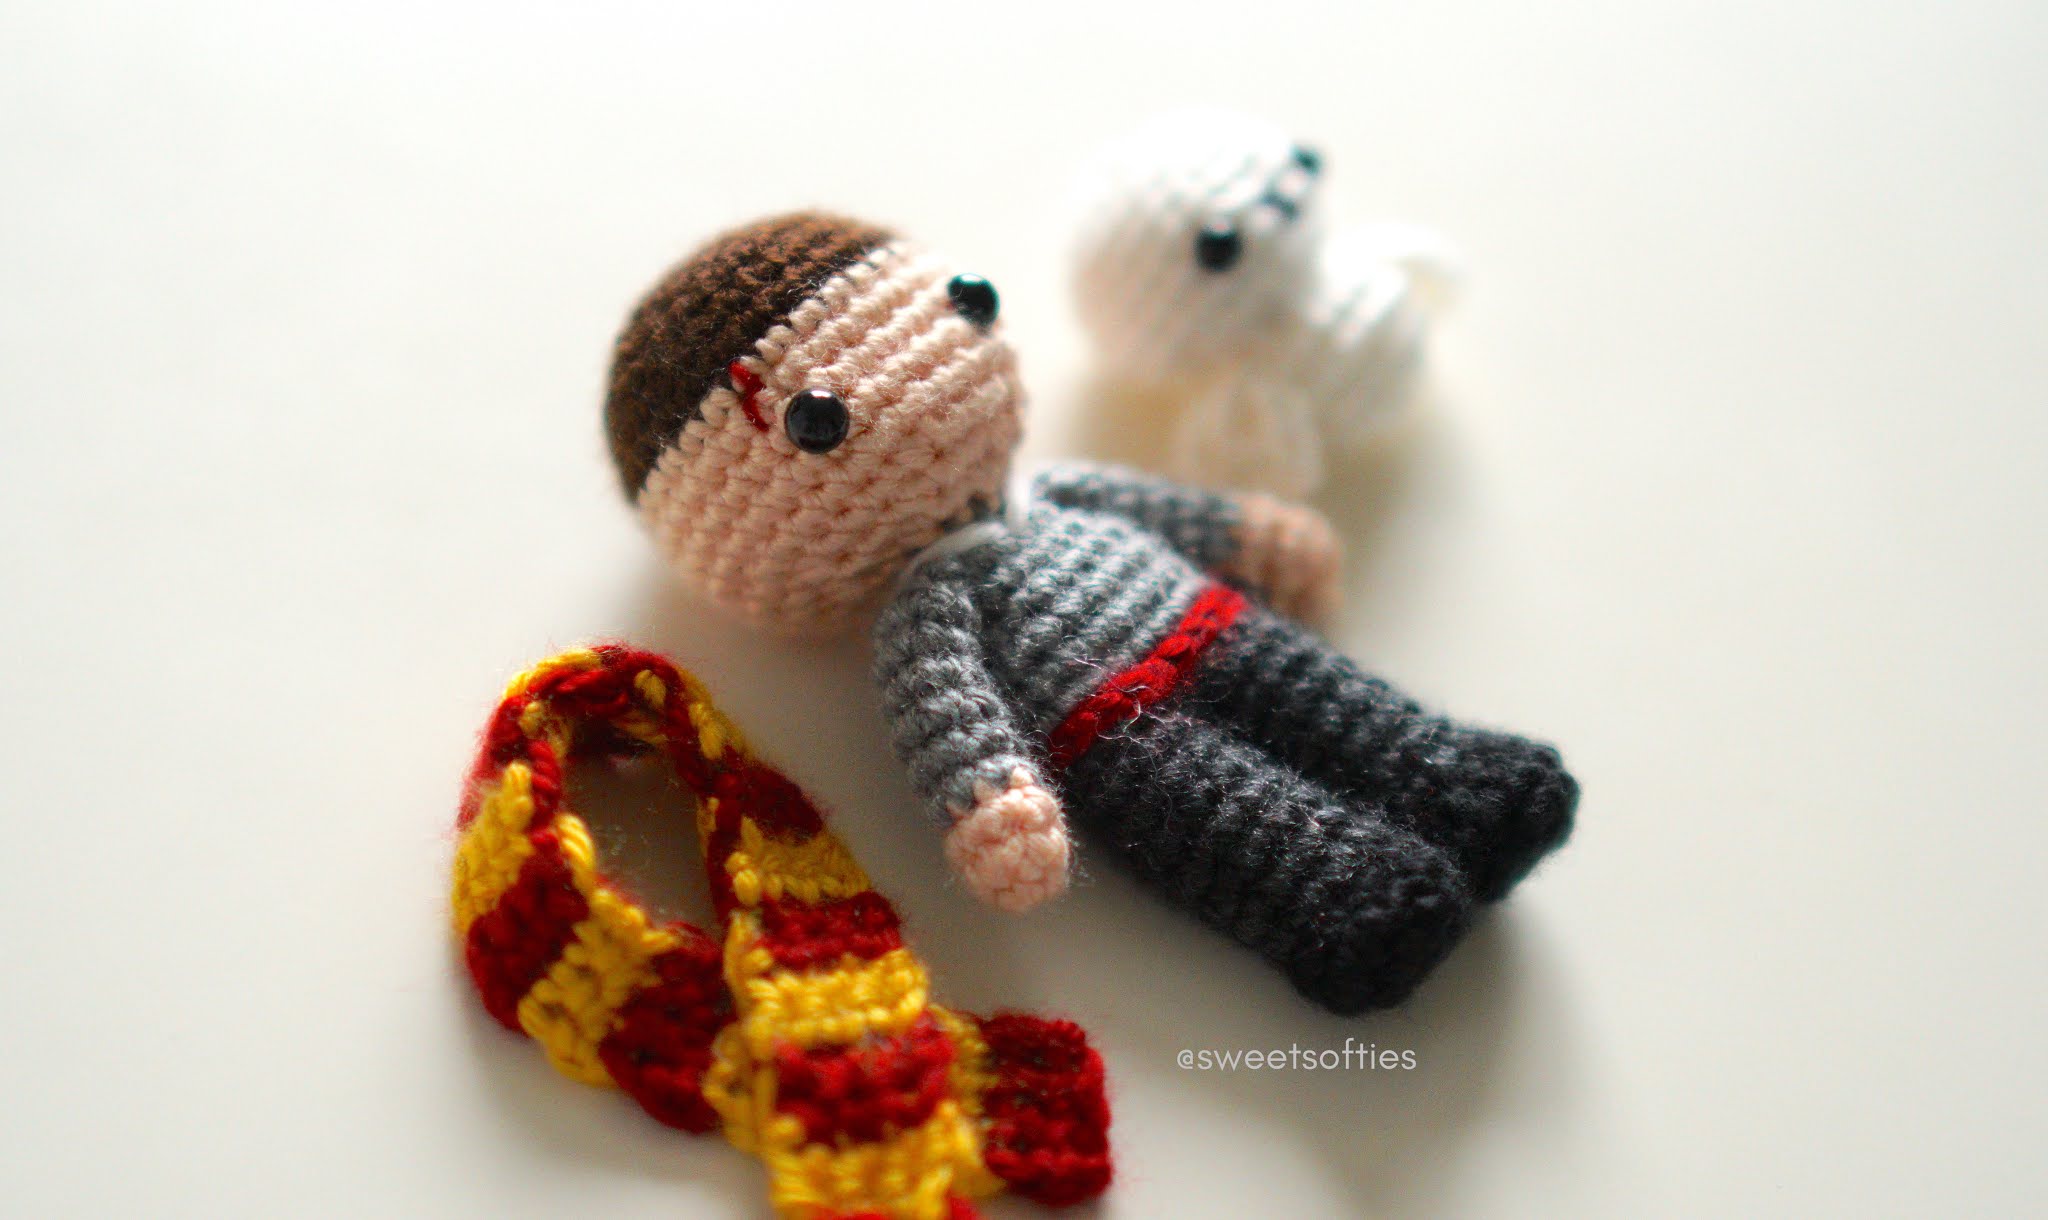 Meet Harry Potter™. Each detail, from the characteristically untidy ha, amigurumis crochet